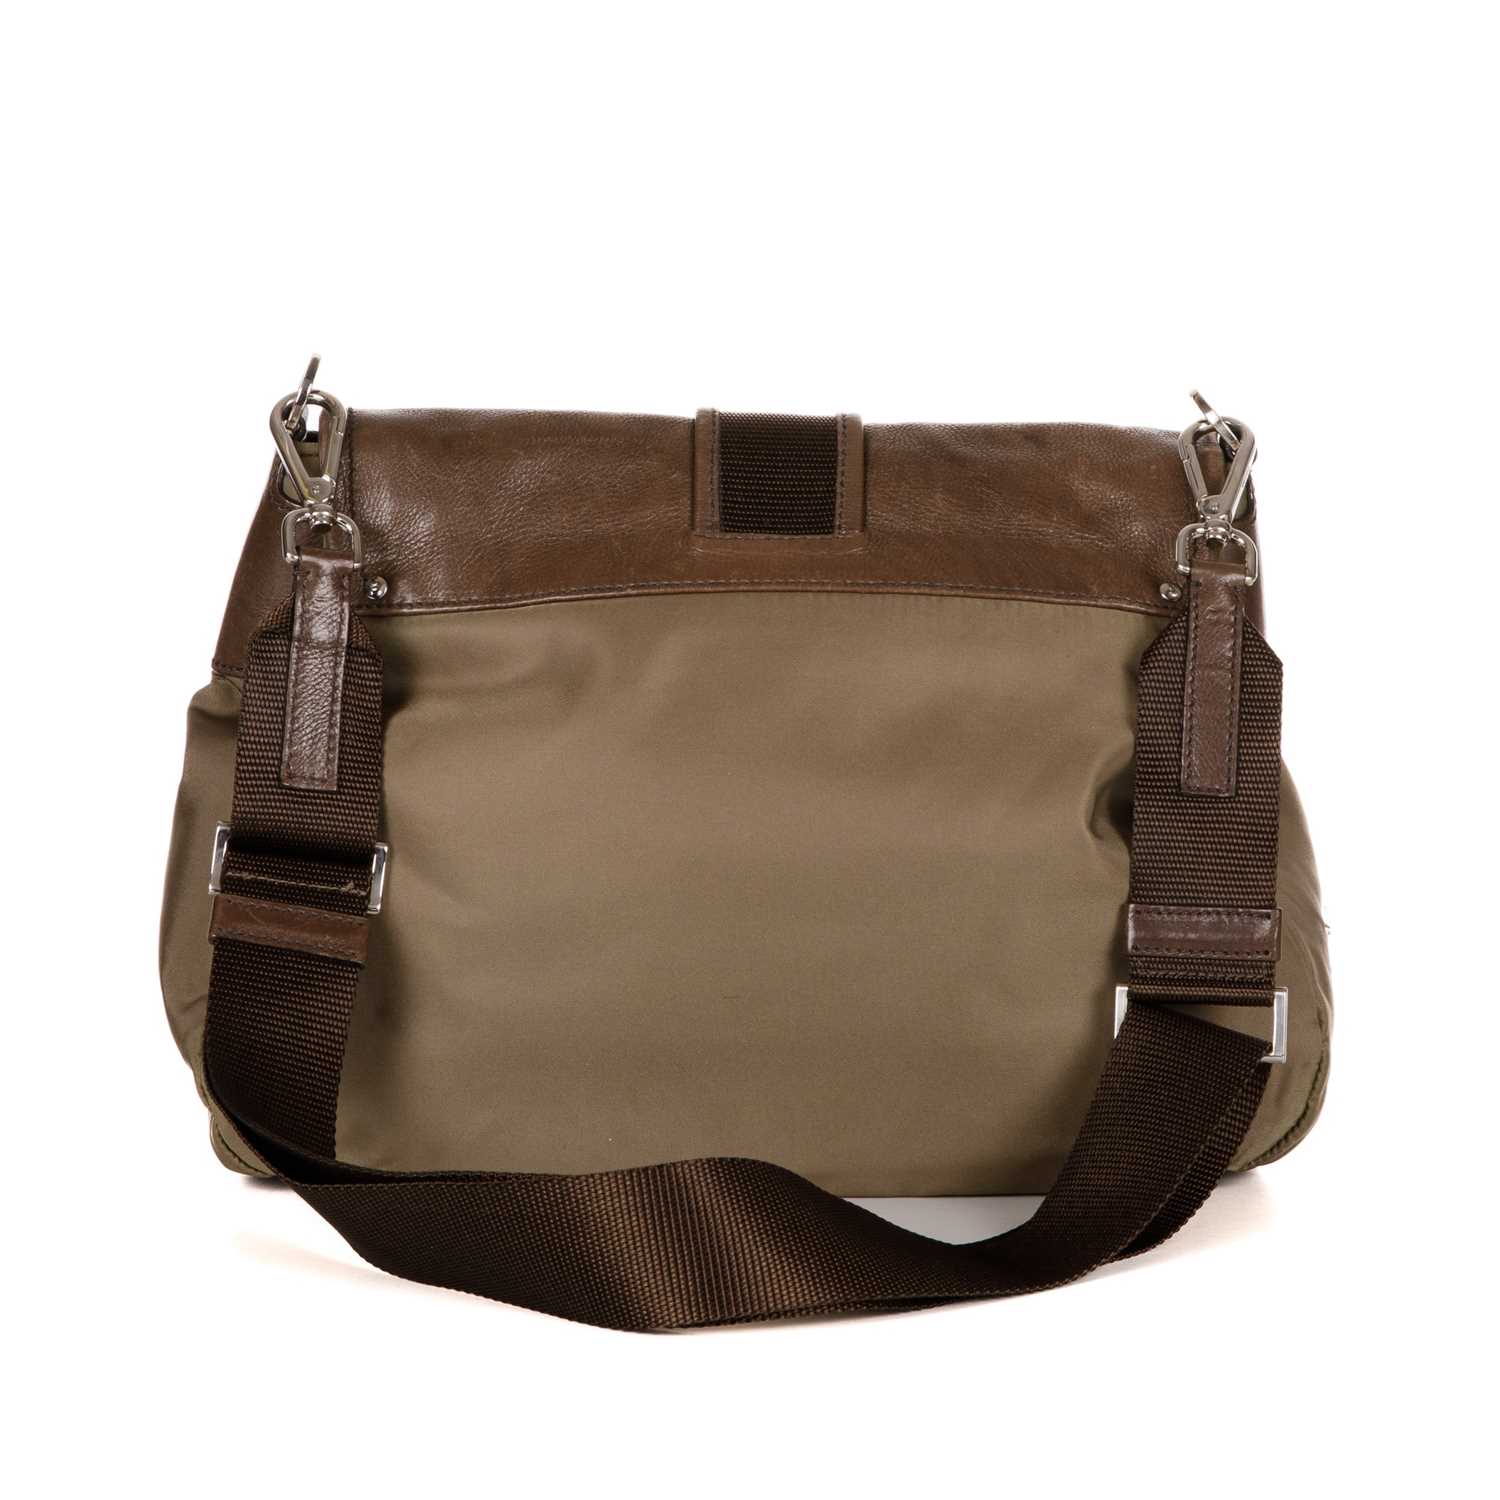 Prada, a crossbody Flap Buckle bag, designed with a khaki green nylon and brown leather exterior, - Image 2 of 4